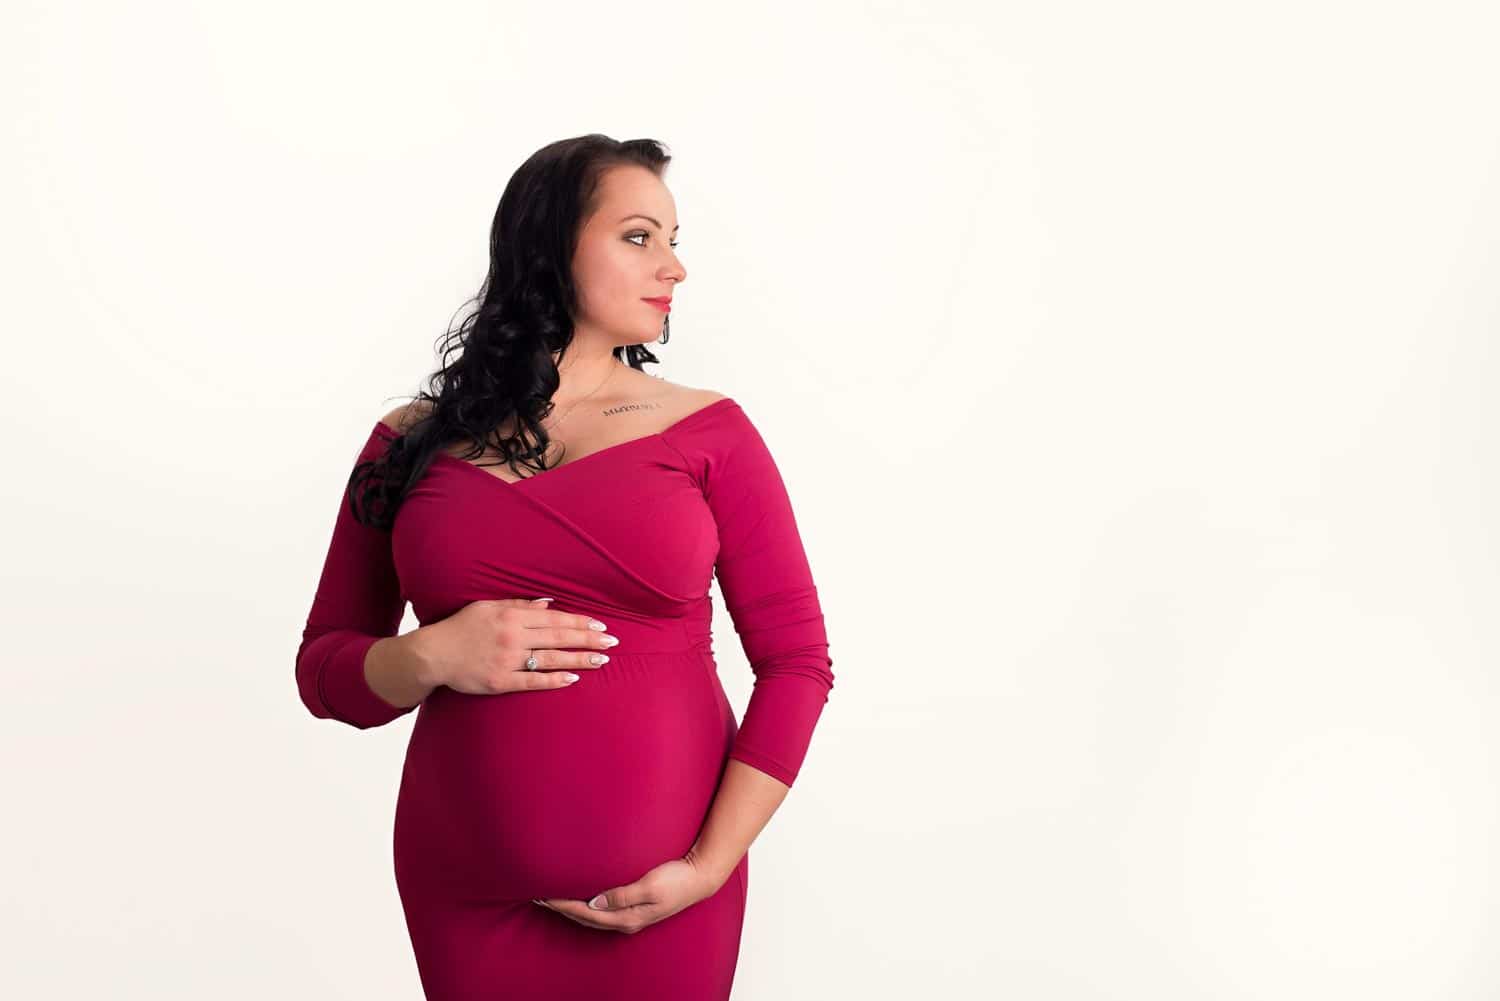 professional pregnancy portrait in red maternity dress photographed by Maternity Photographer Manchester